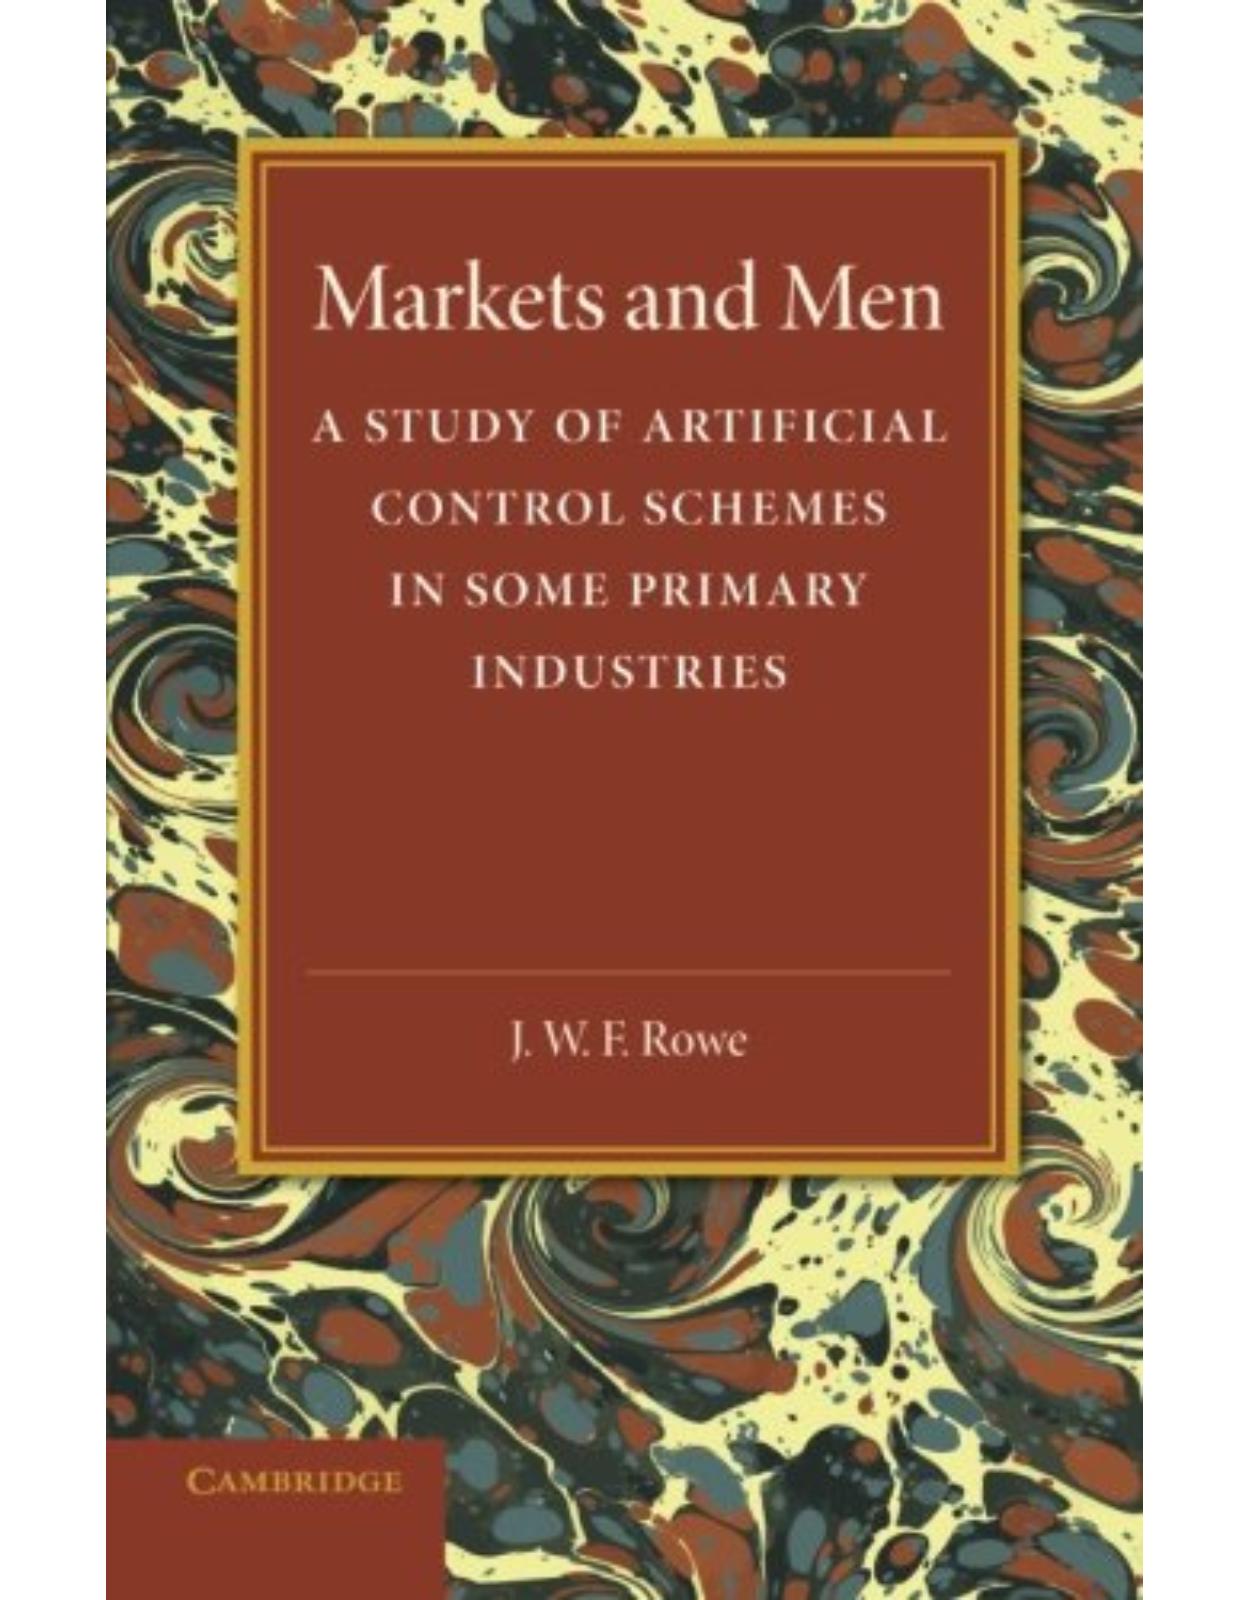 Markets and Men: A Study of Artificial Control Schemes in Some Primary Industries